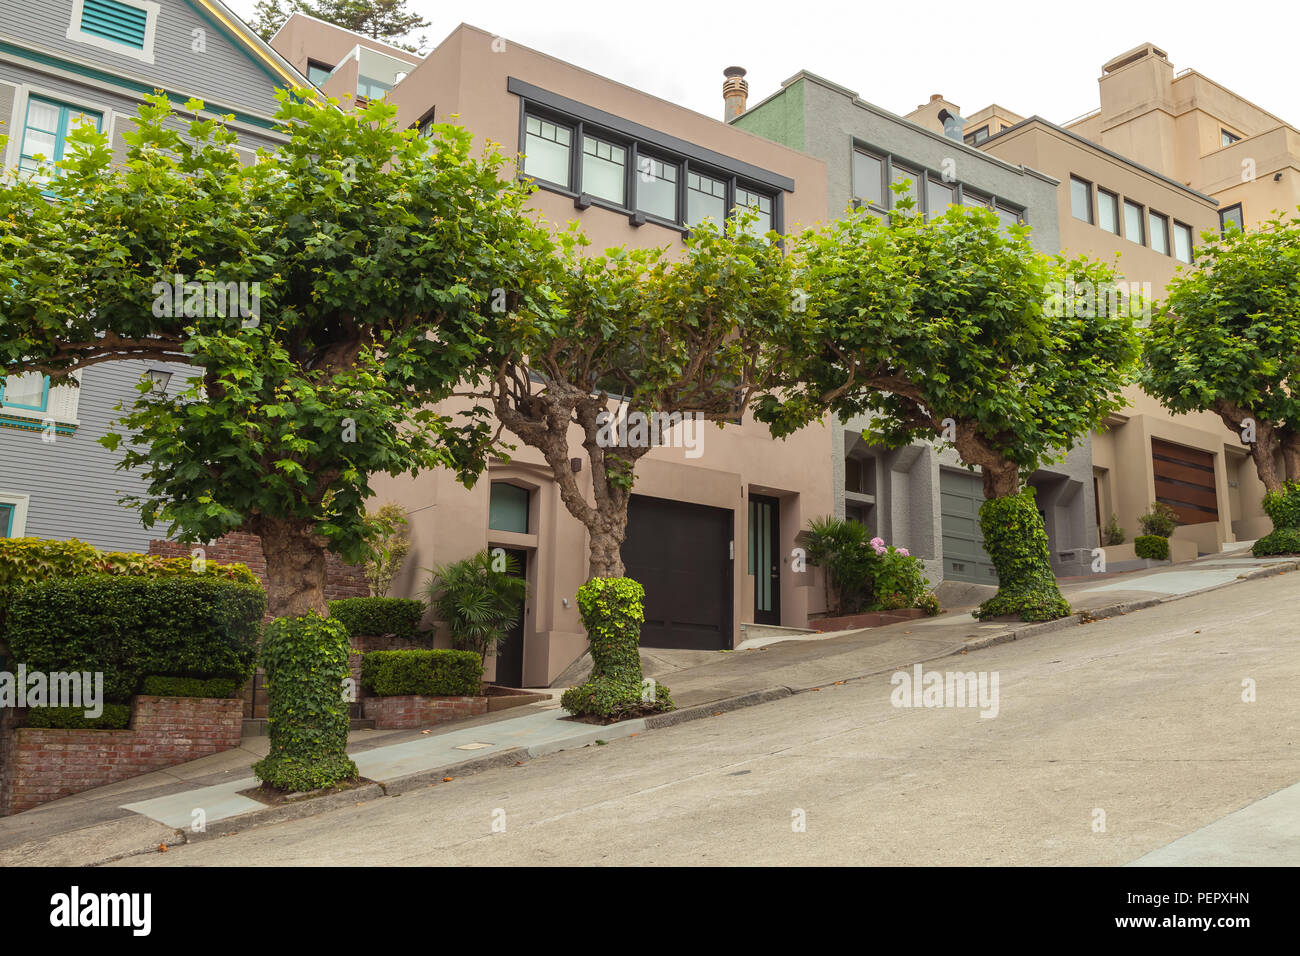 London plane trees and the home curb appeal in San Francisco, California Stock Photo